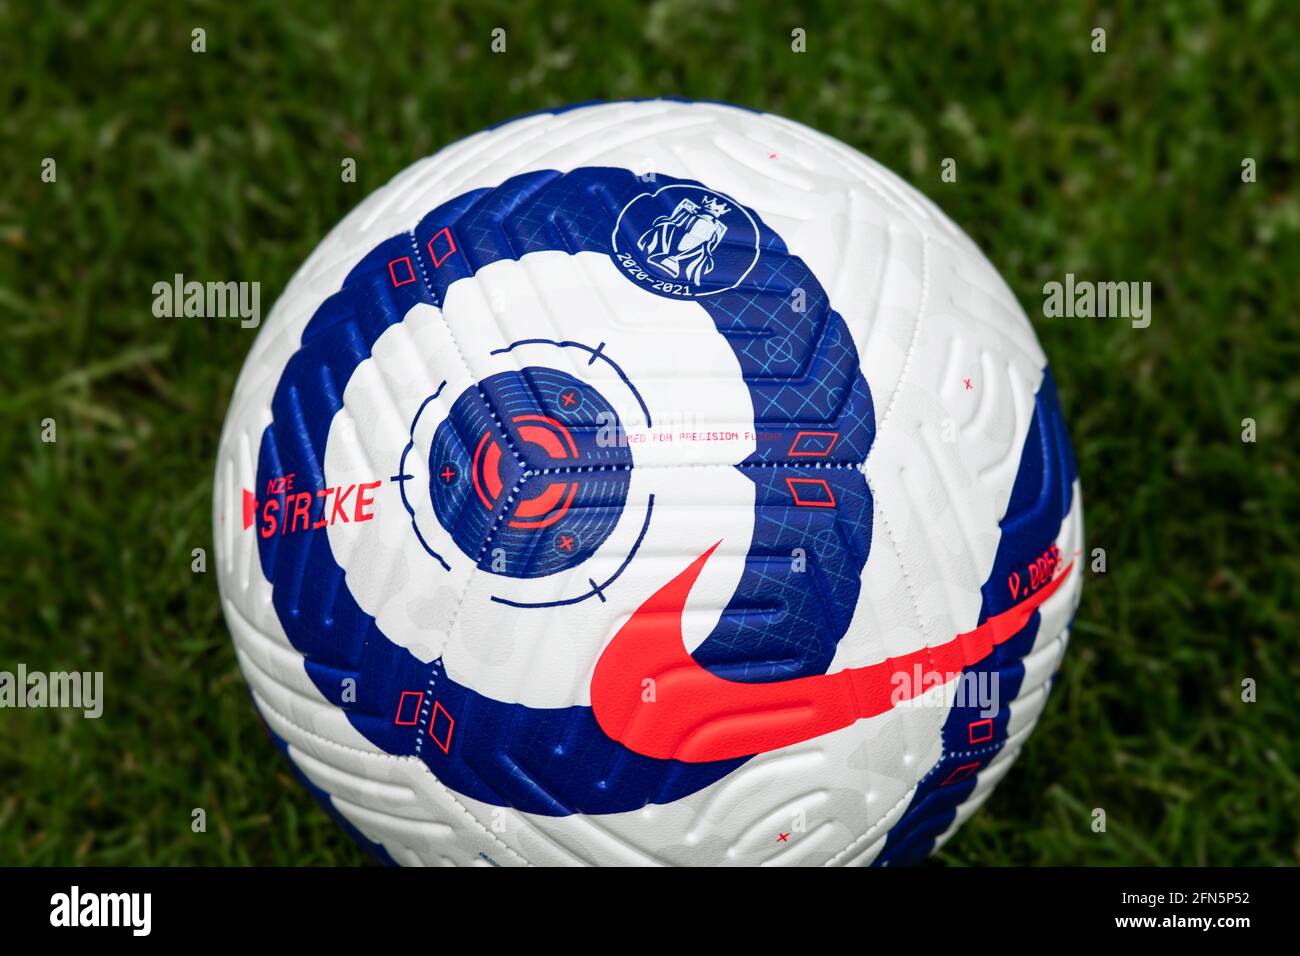 Nike Premier League Football 2021 High Resolution Stock Photography and  Images - Alamy